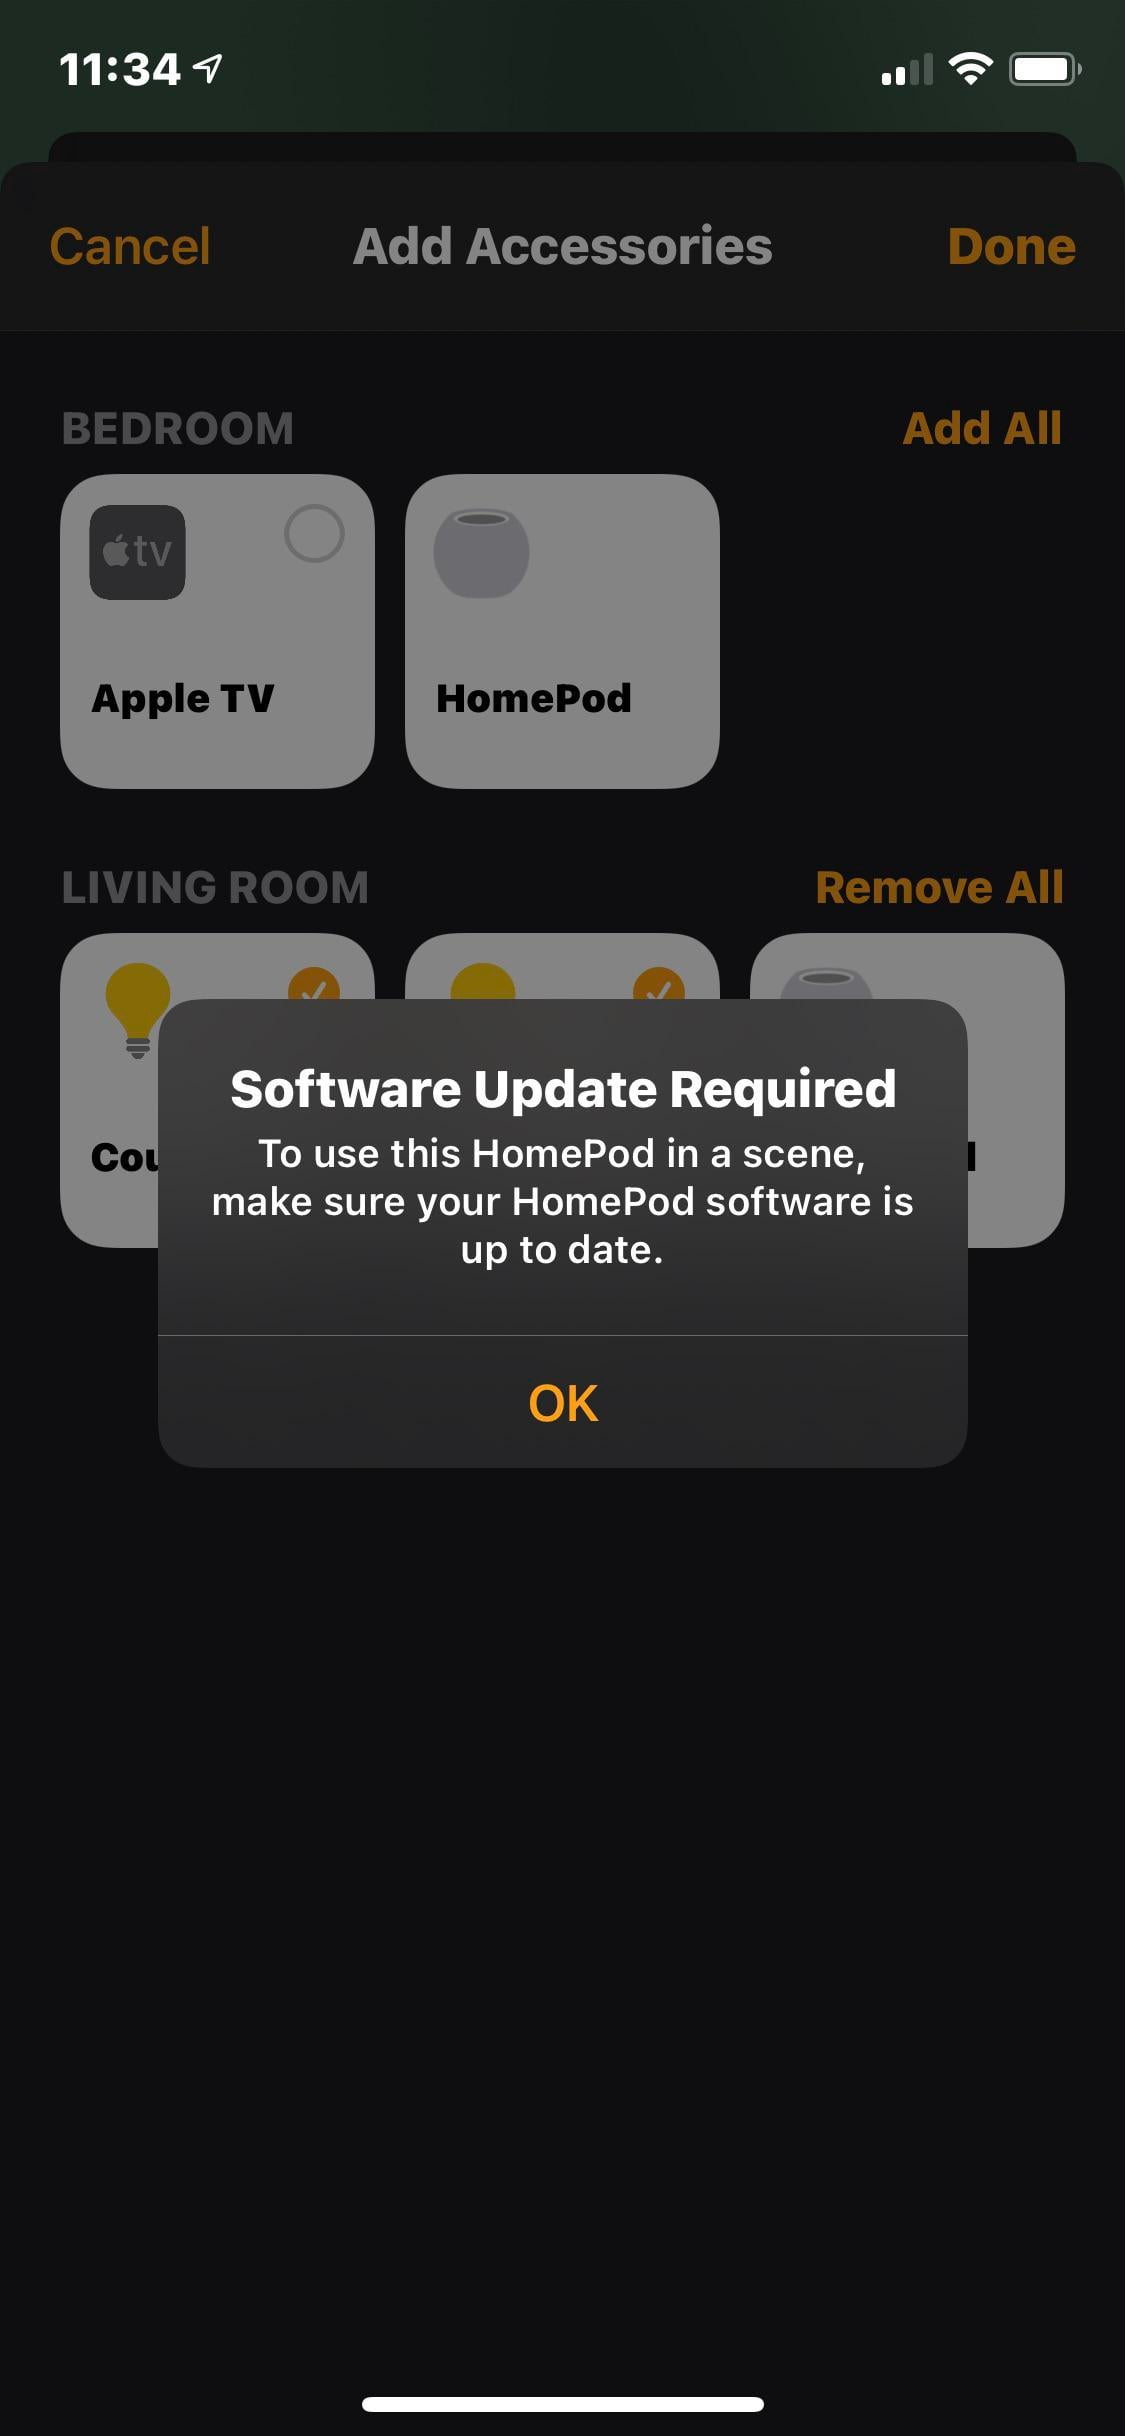 HomePod software needs updating but when I check it it